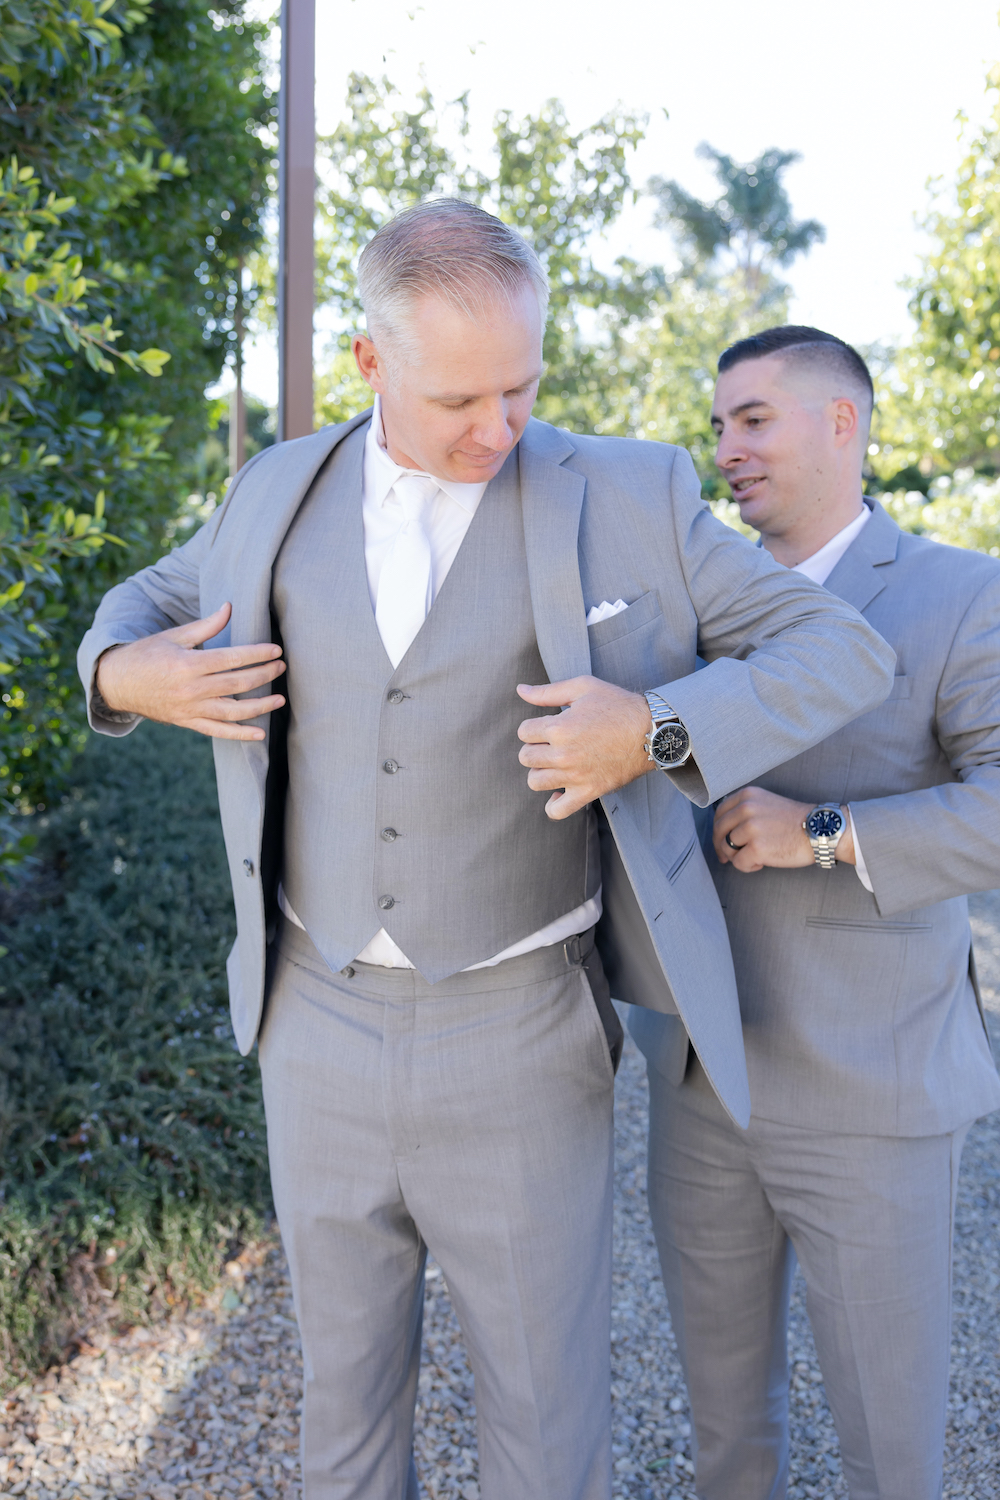 Groom in a classic grey suit putting on his jacket with the assistance of his groomsman.